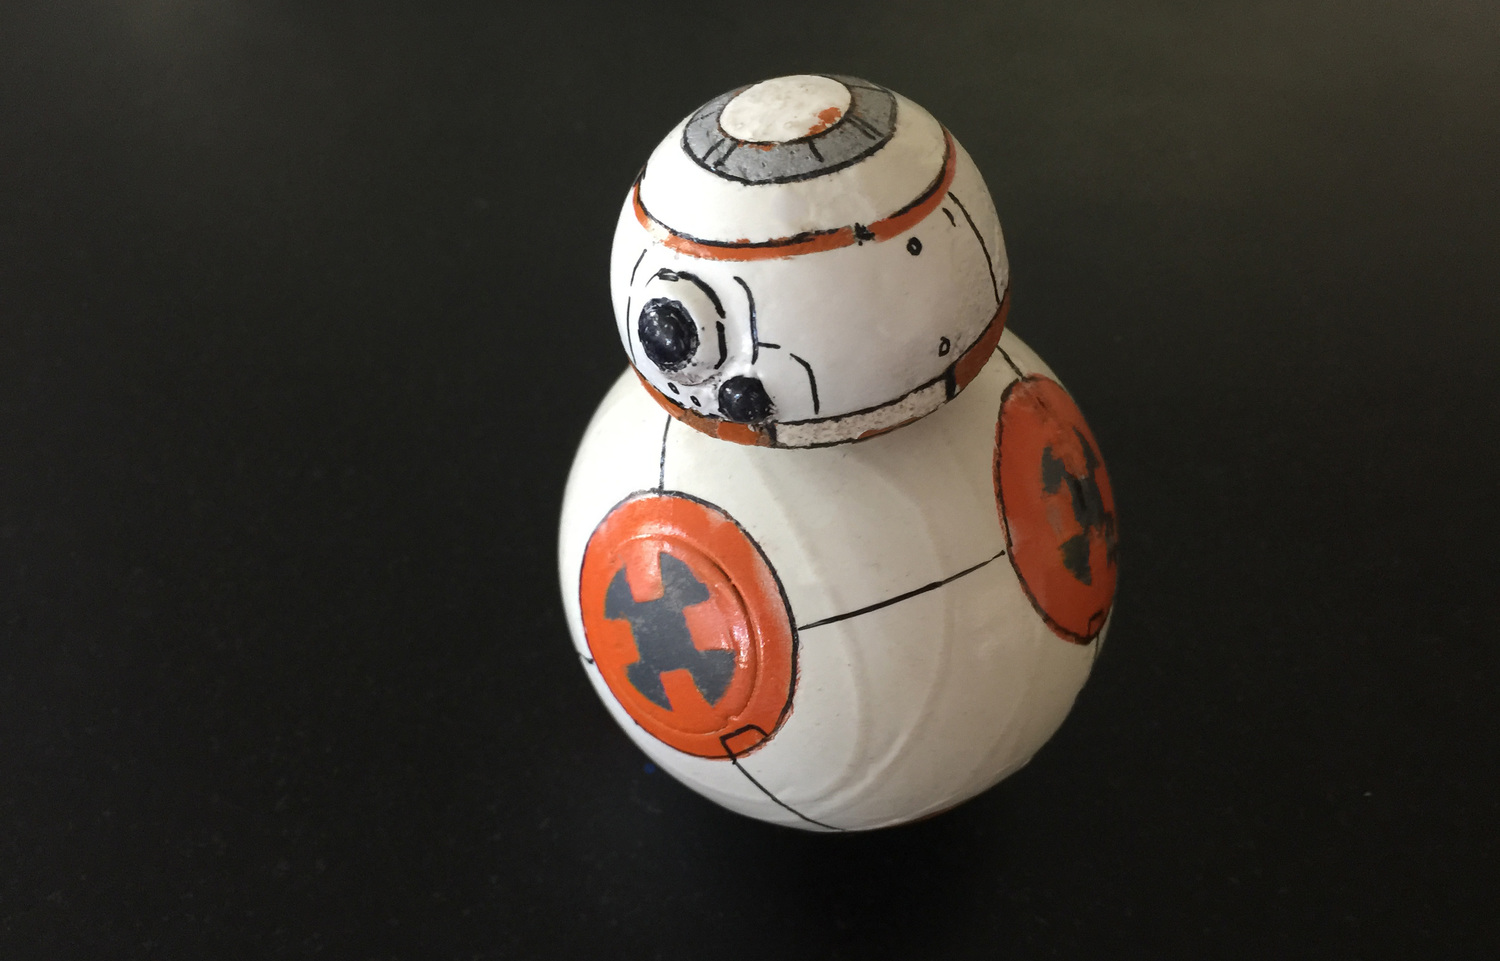 Make This Mini Star Wars BB-8 Ball Droid with a Hacked Sphero